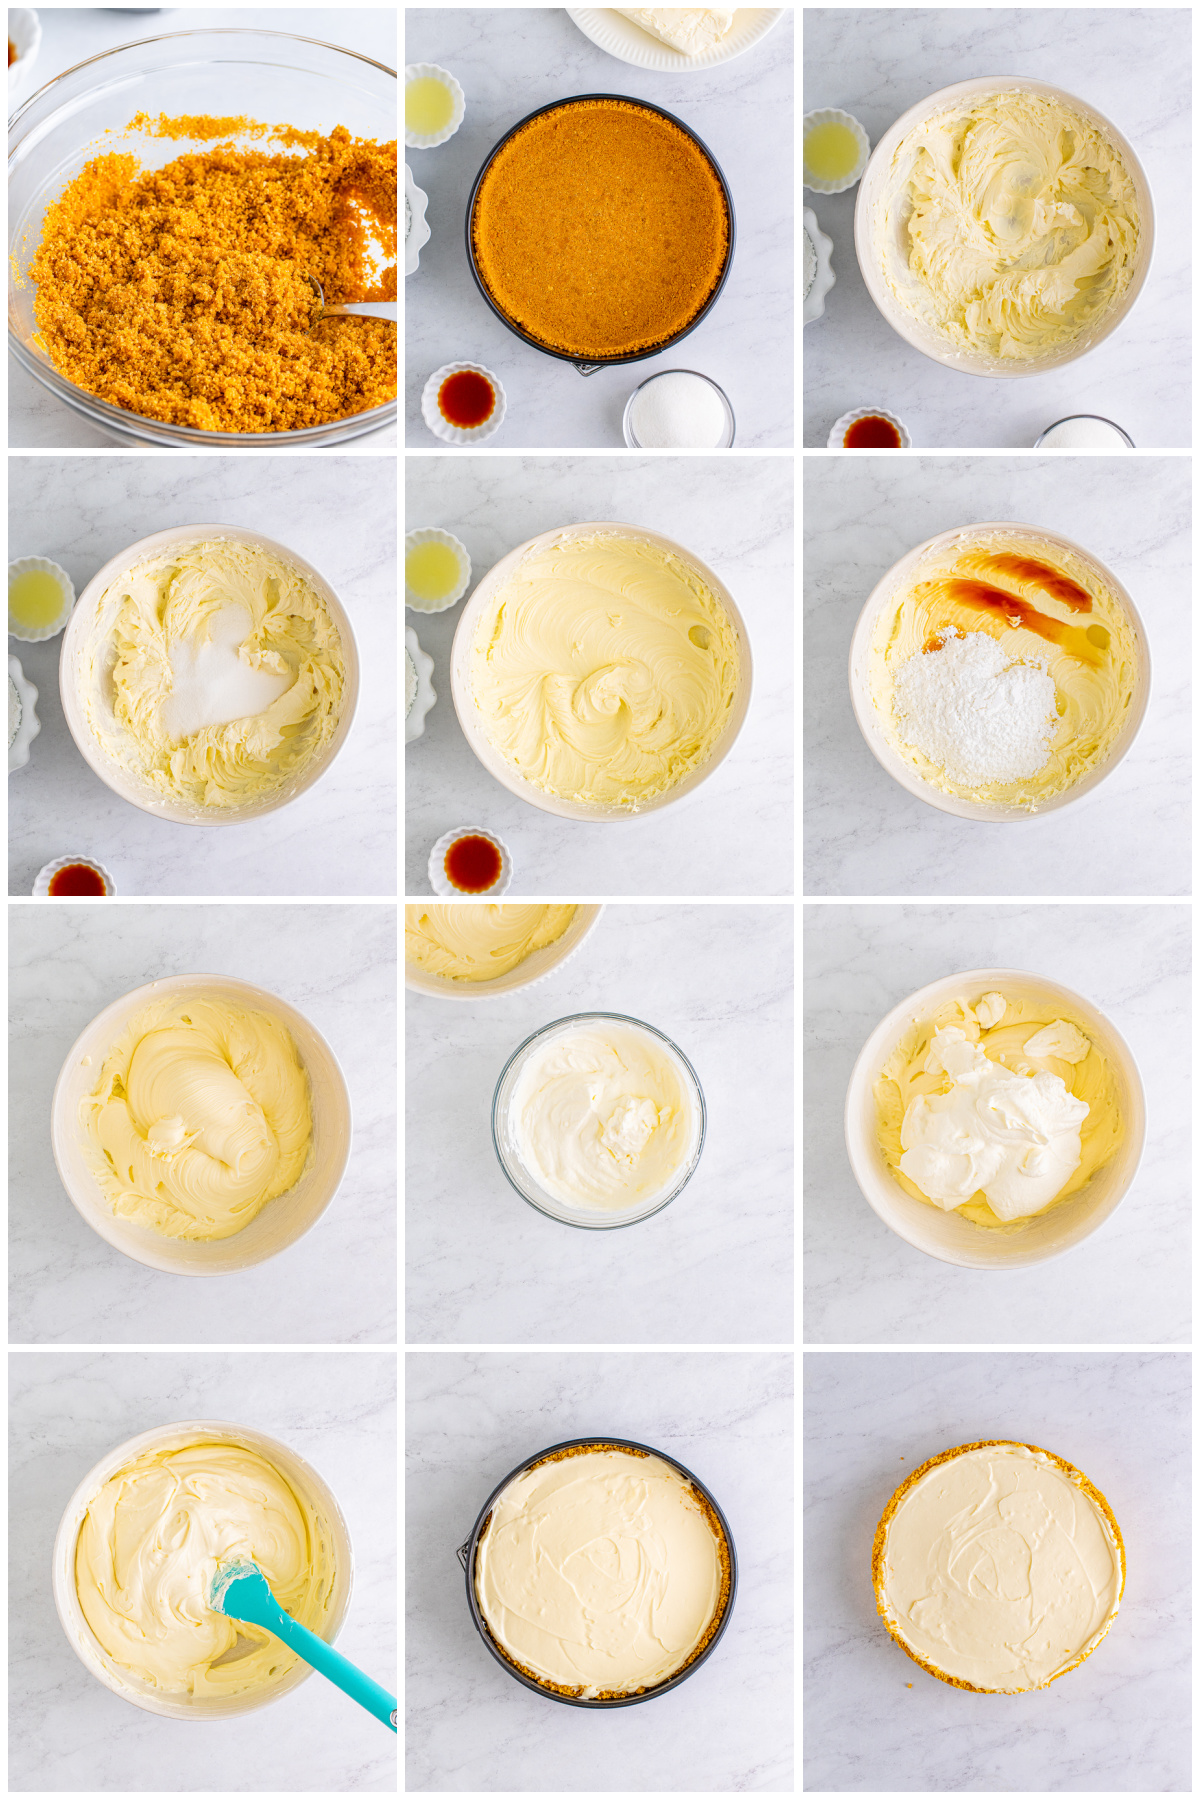 Step by step photos on how to make a No Bake Cheesecake Recipe.